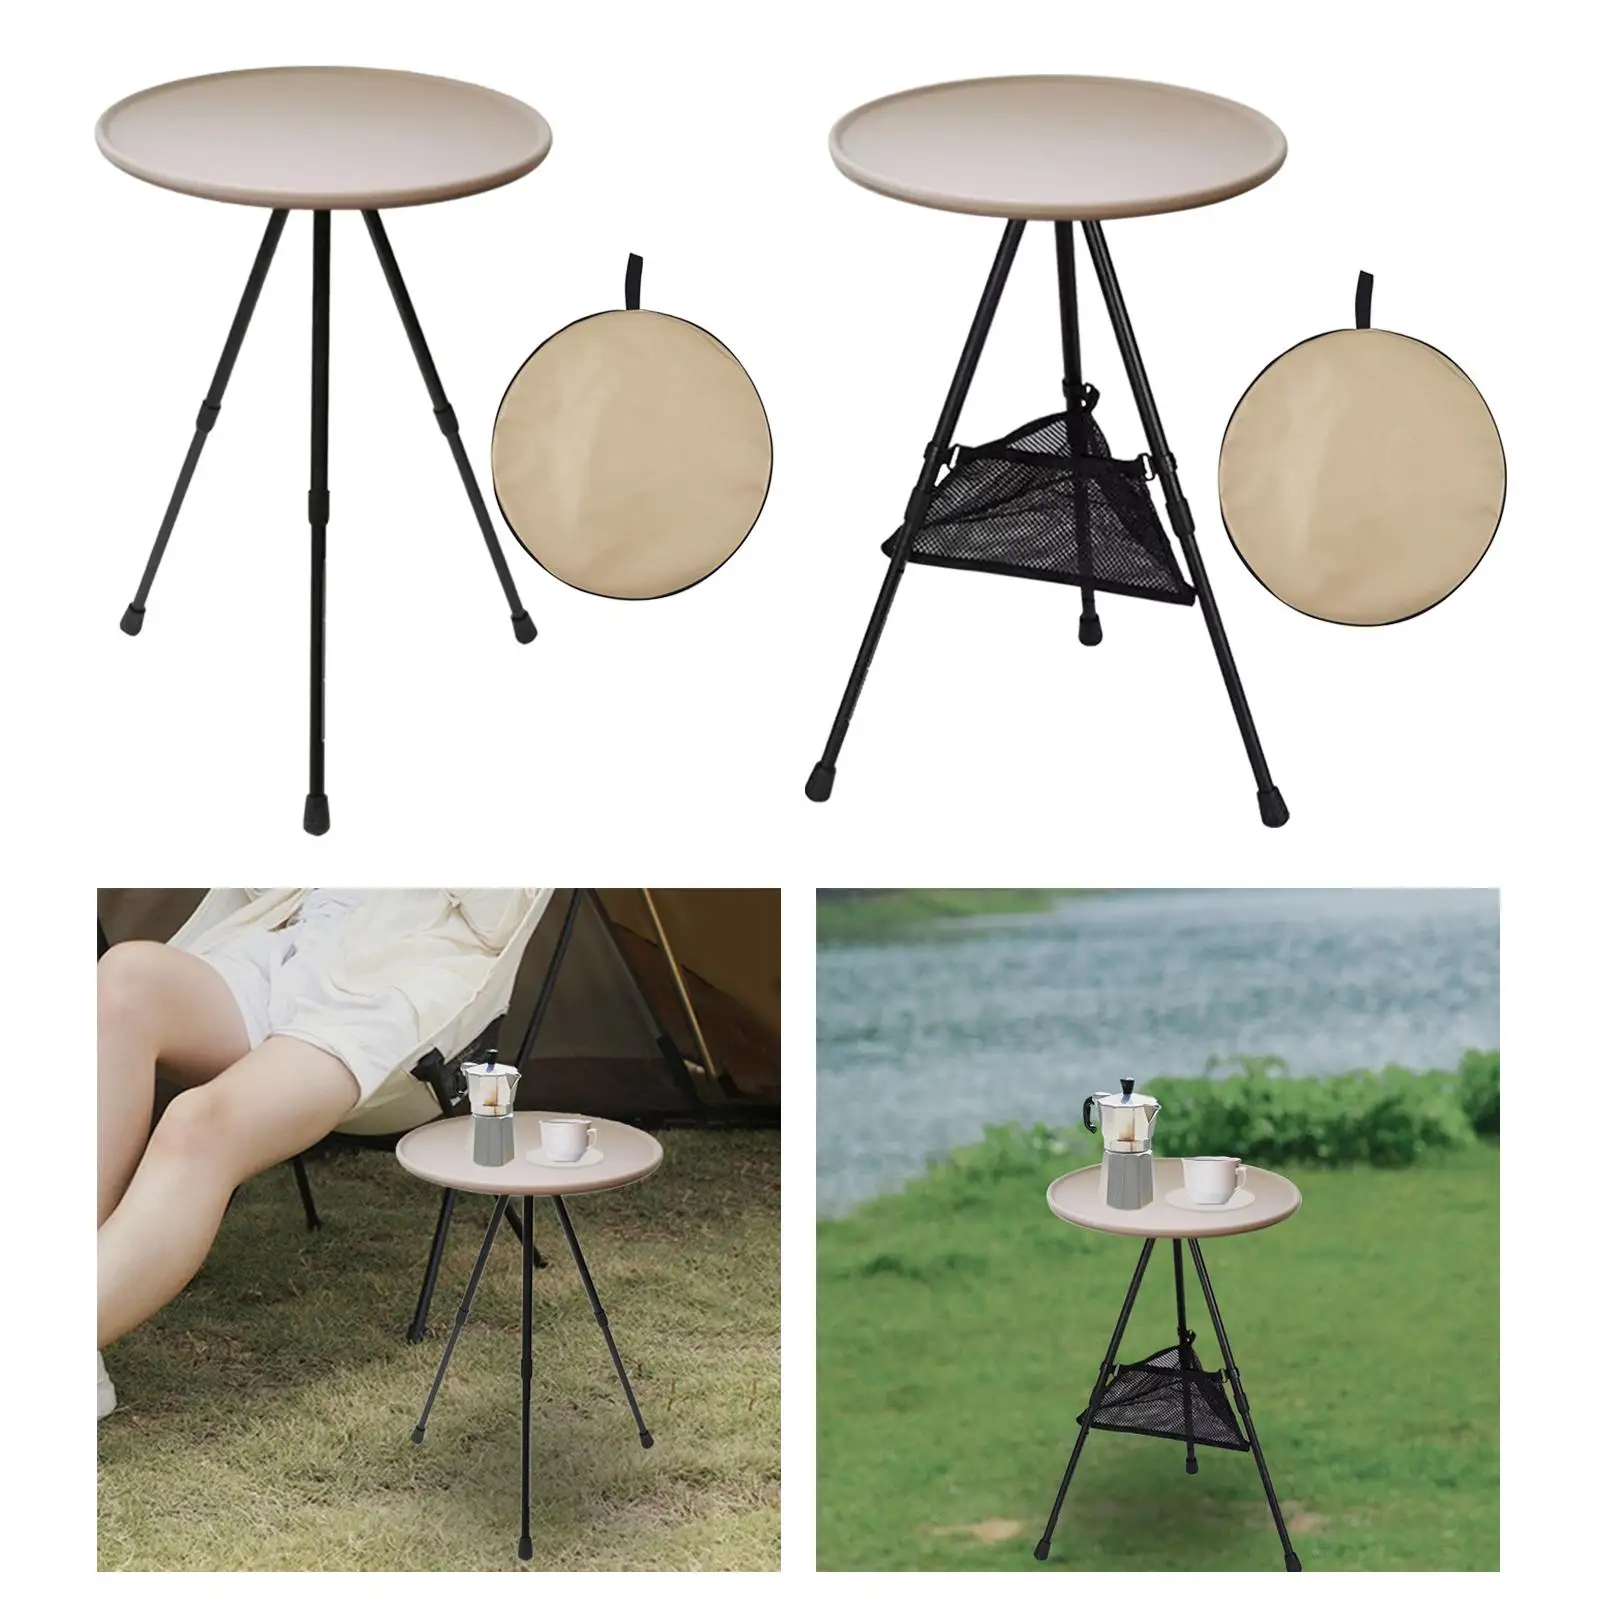 Foldable Picnic Table Portable Camping Table Tea Coffee Table Desk Outdoor Folding Round Table for Outdoors Picnic Beach Travel